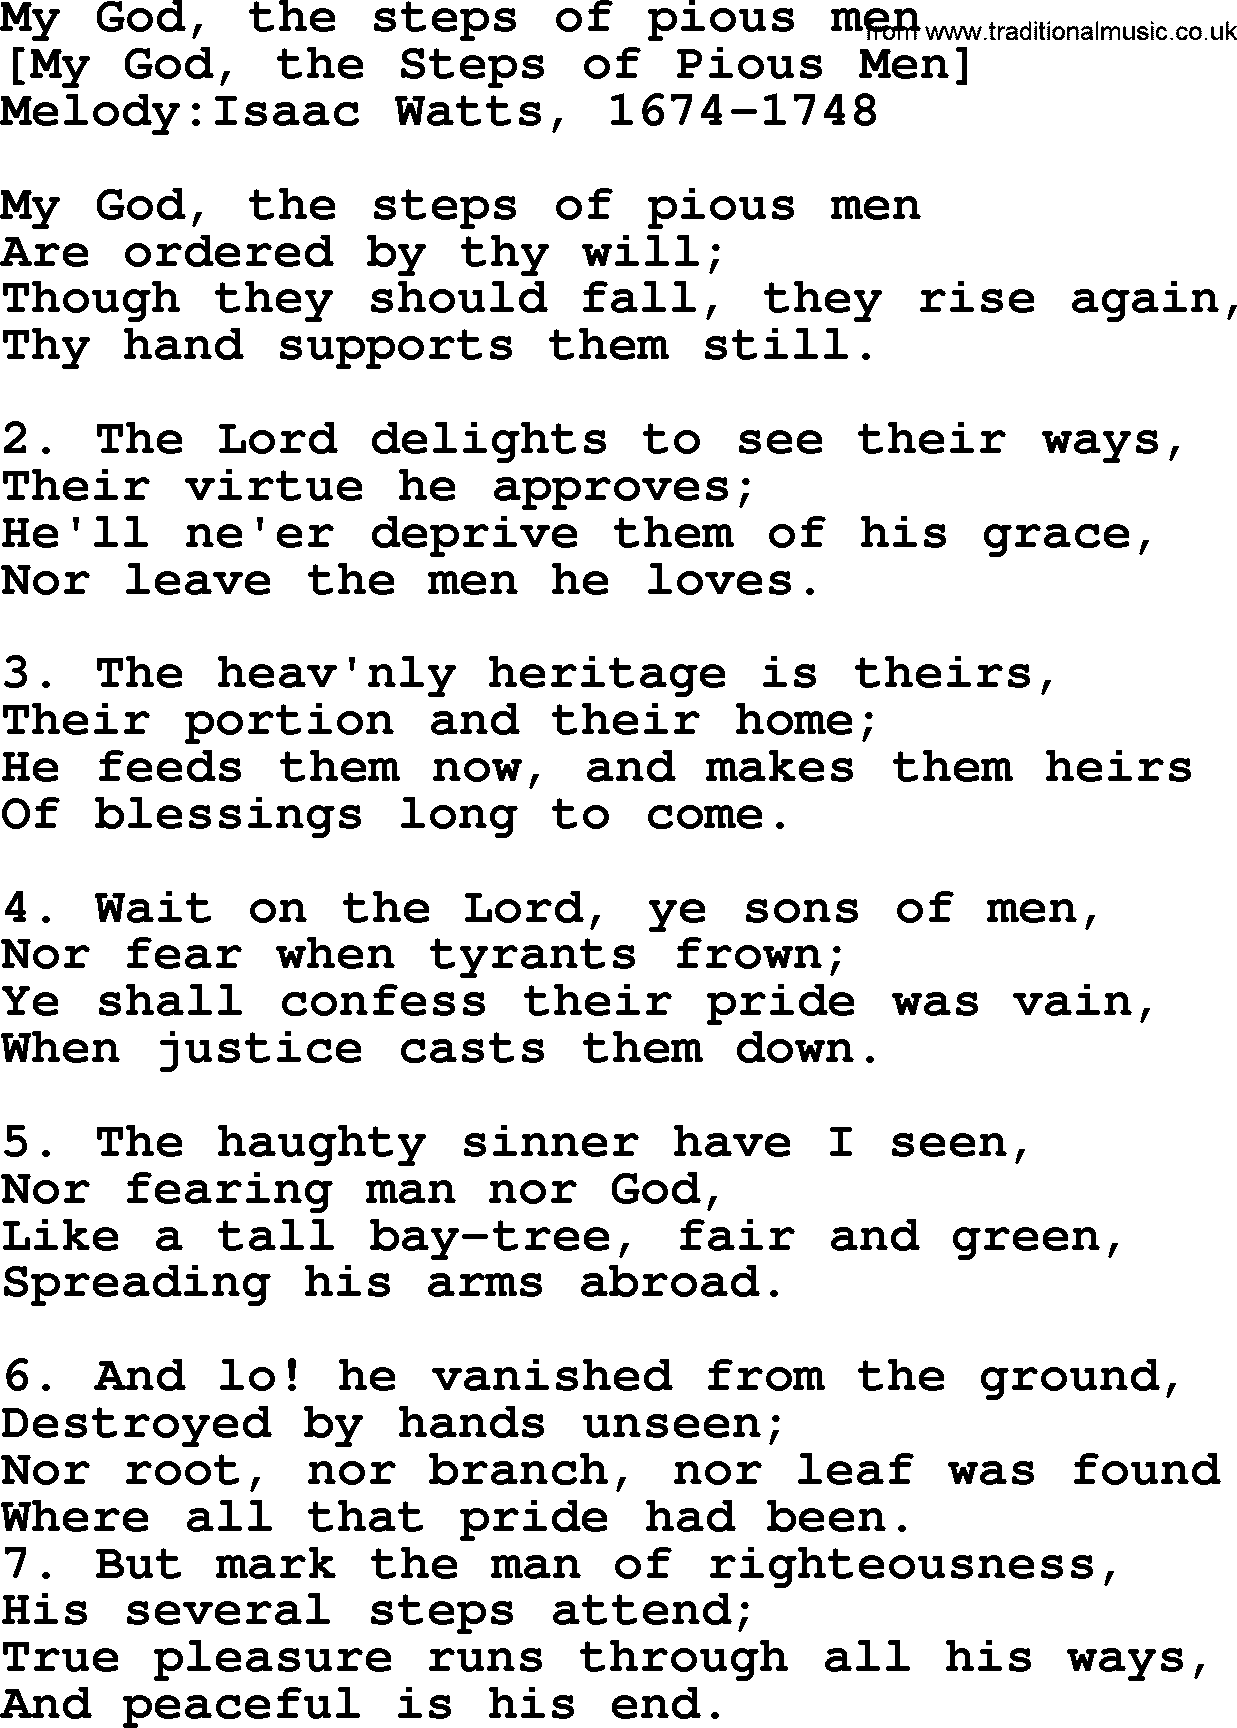 Old English Song: My God, The Steps Of Pious Men lyrics